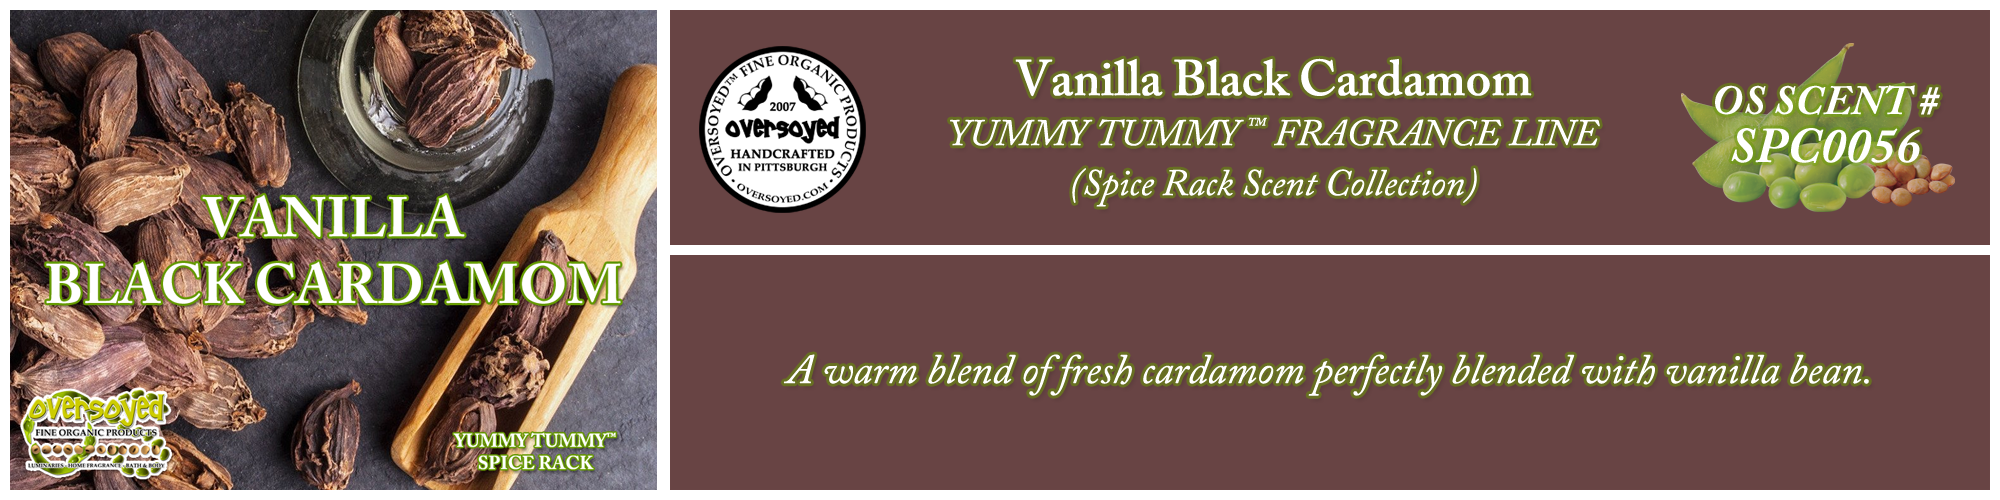 Vanilla Black Cardamom Handcrafted Products Collection